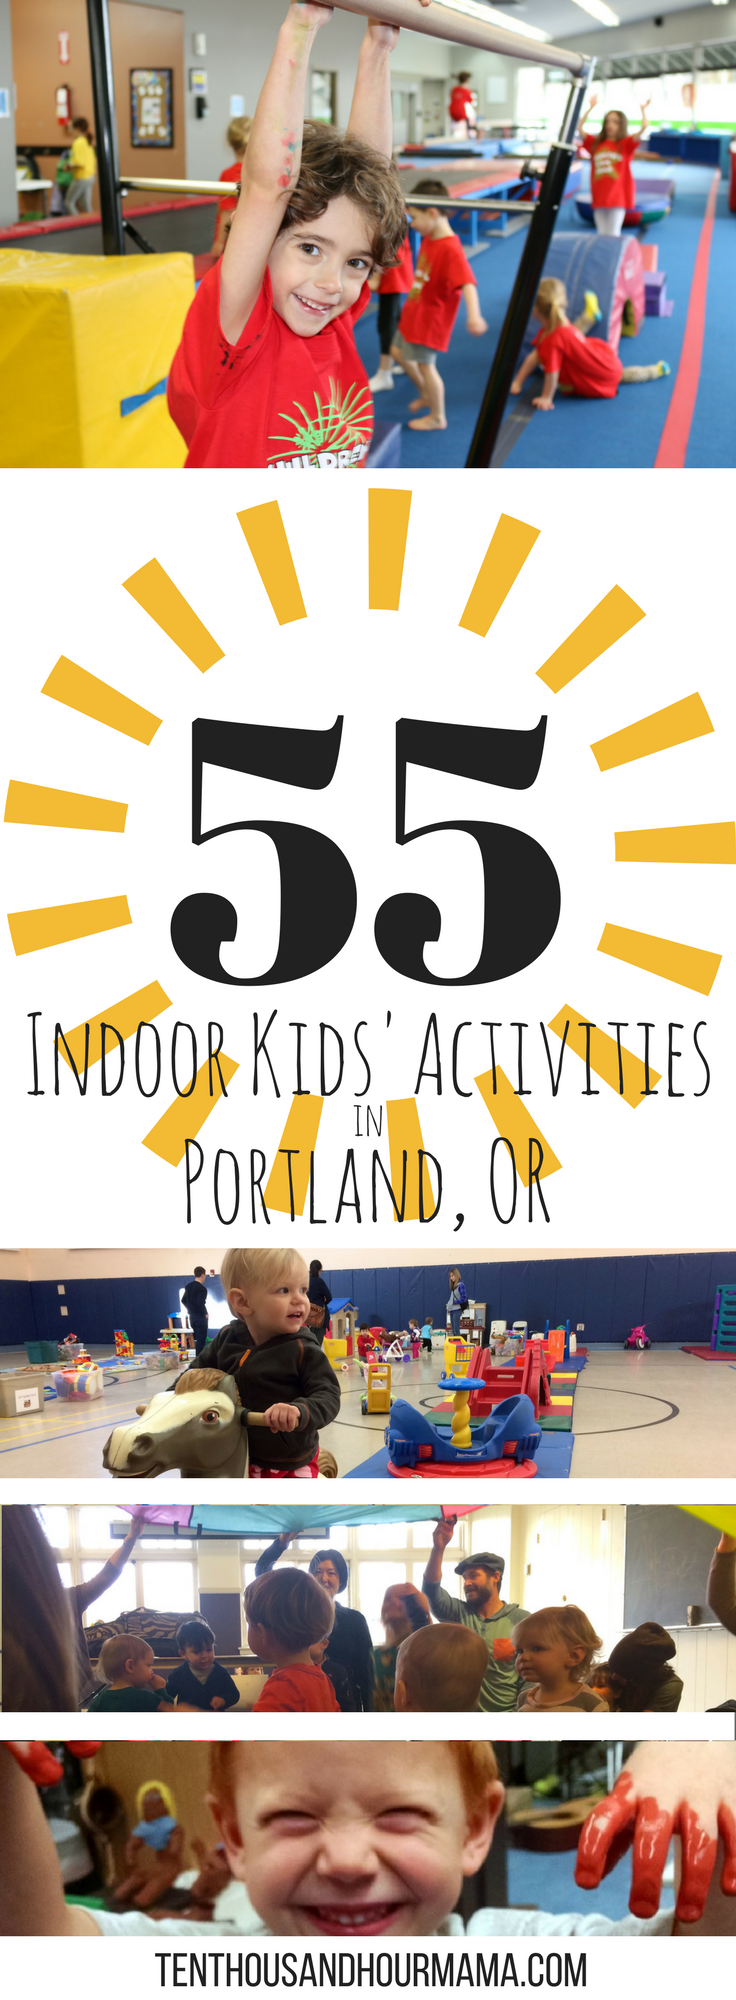 Indoor activities in Portland, Oregon for kids and families - tons of fun! Ten Thousand Hour Mama